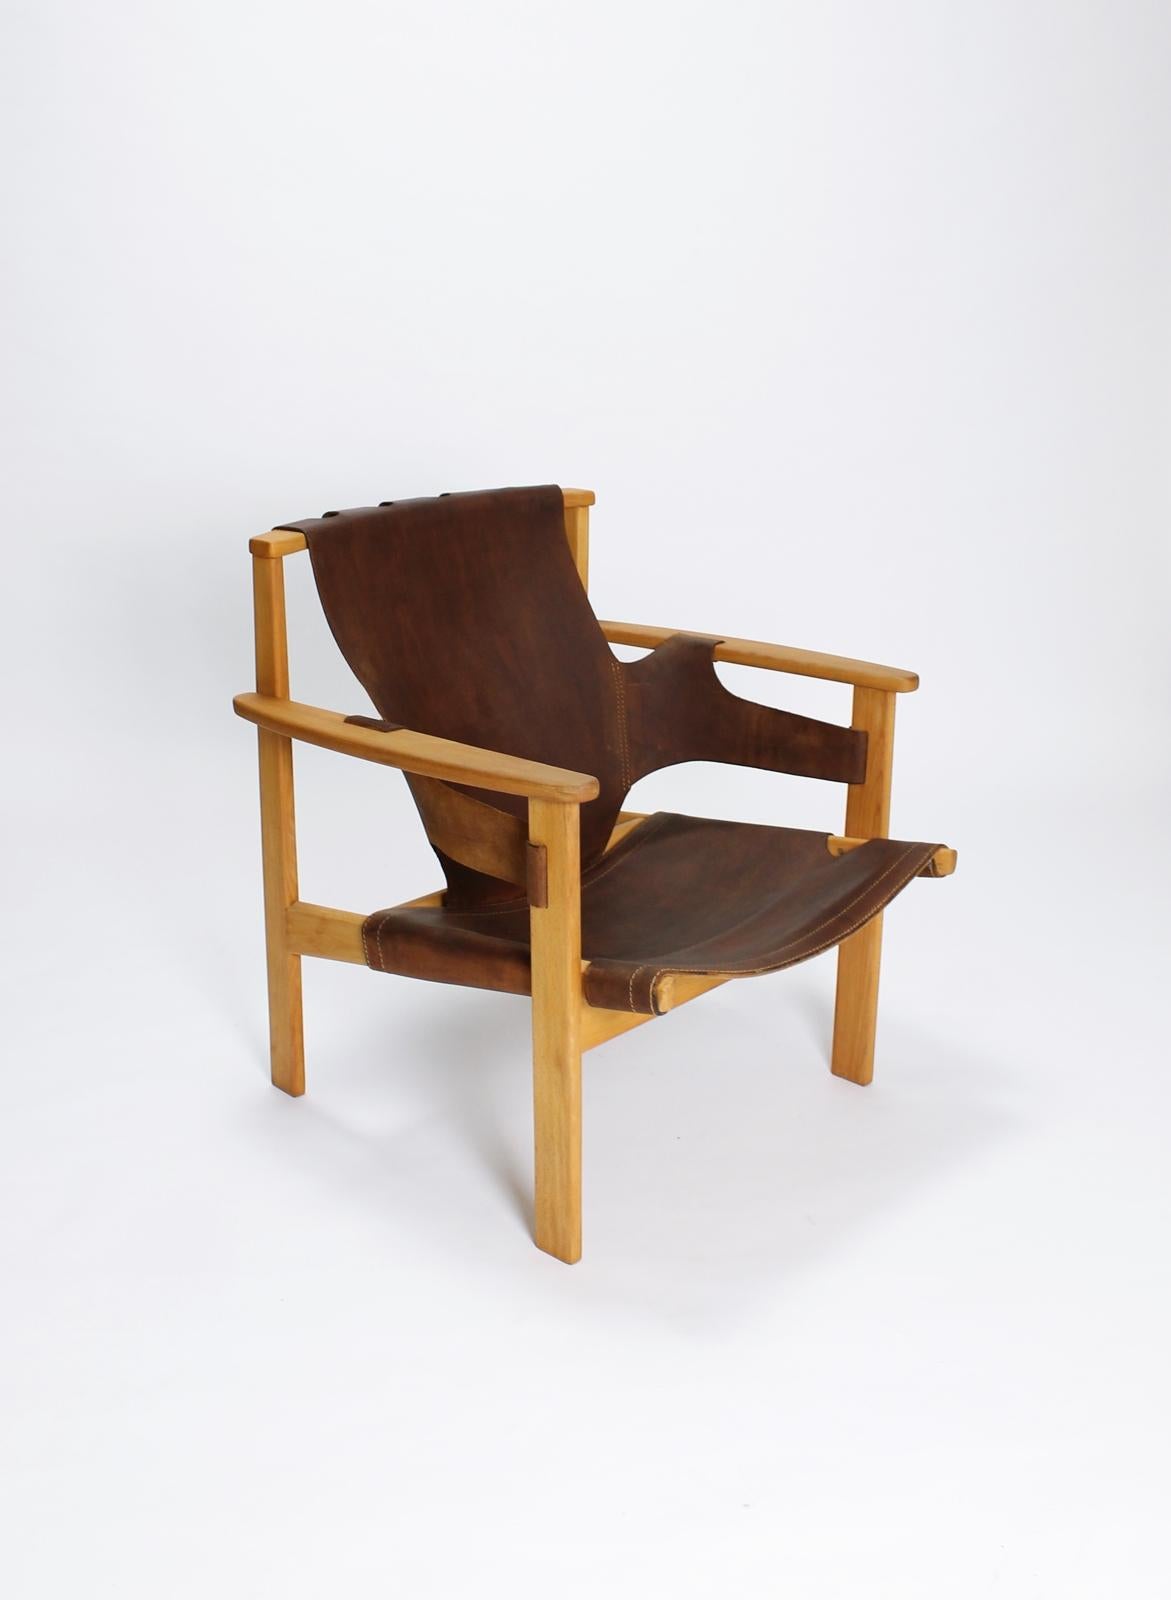 This midcentury classic vintage Swedish lounge chair was designed in 1957 by Carl-Axel Acking for Nordiska Kompaniet. Exhibited at the Triennale in Milan in 1957 and since then named 